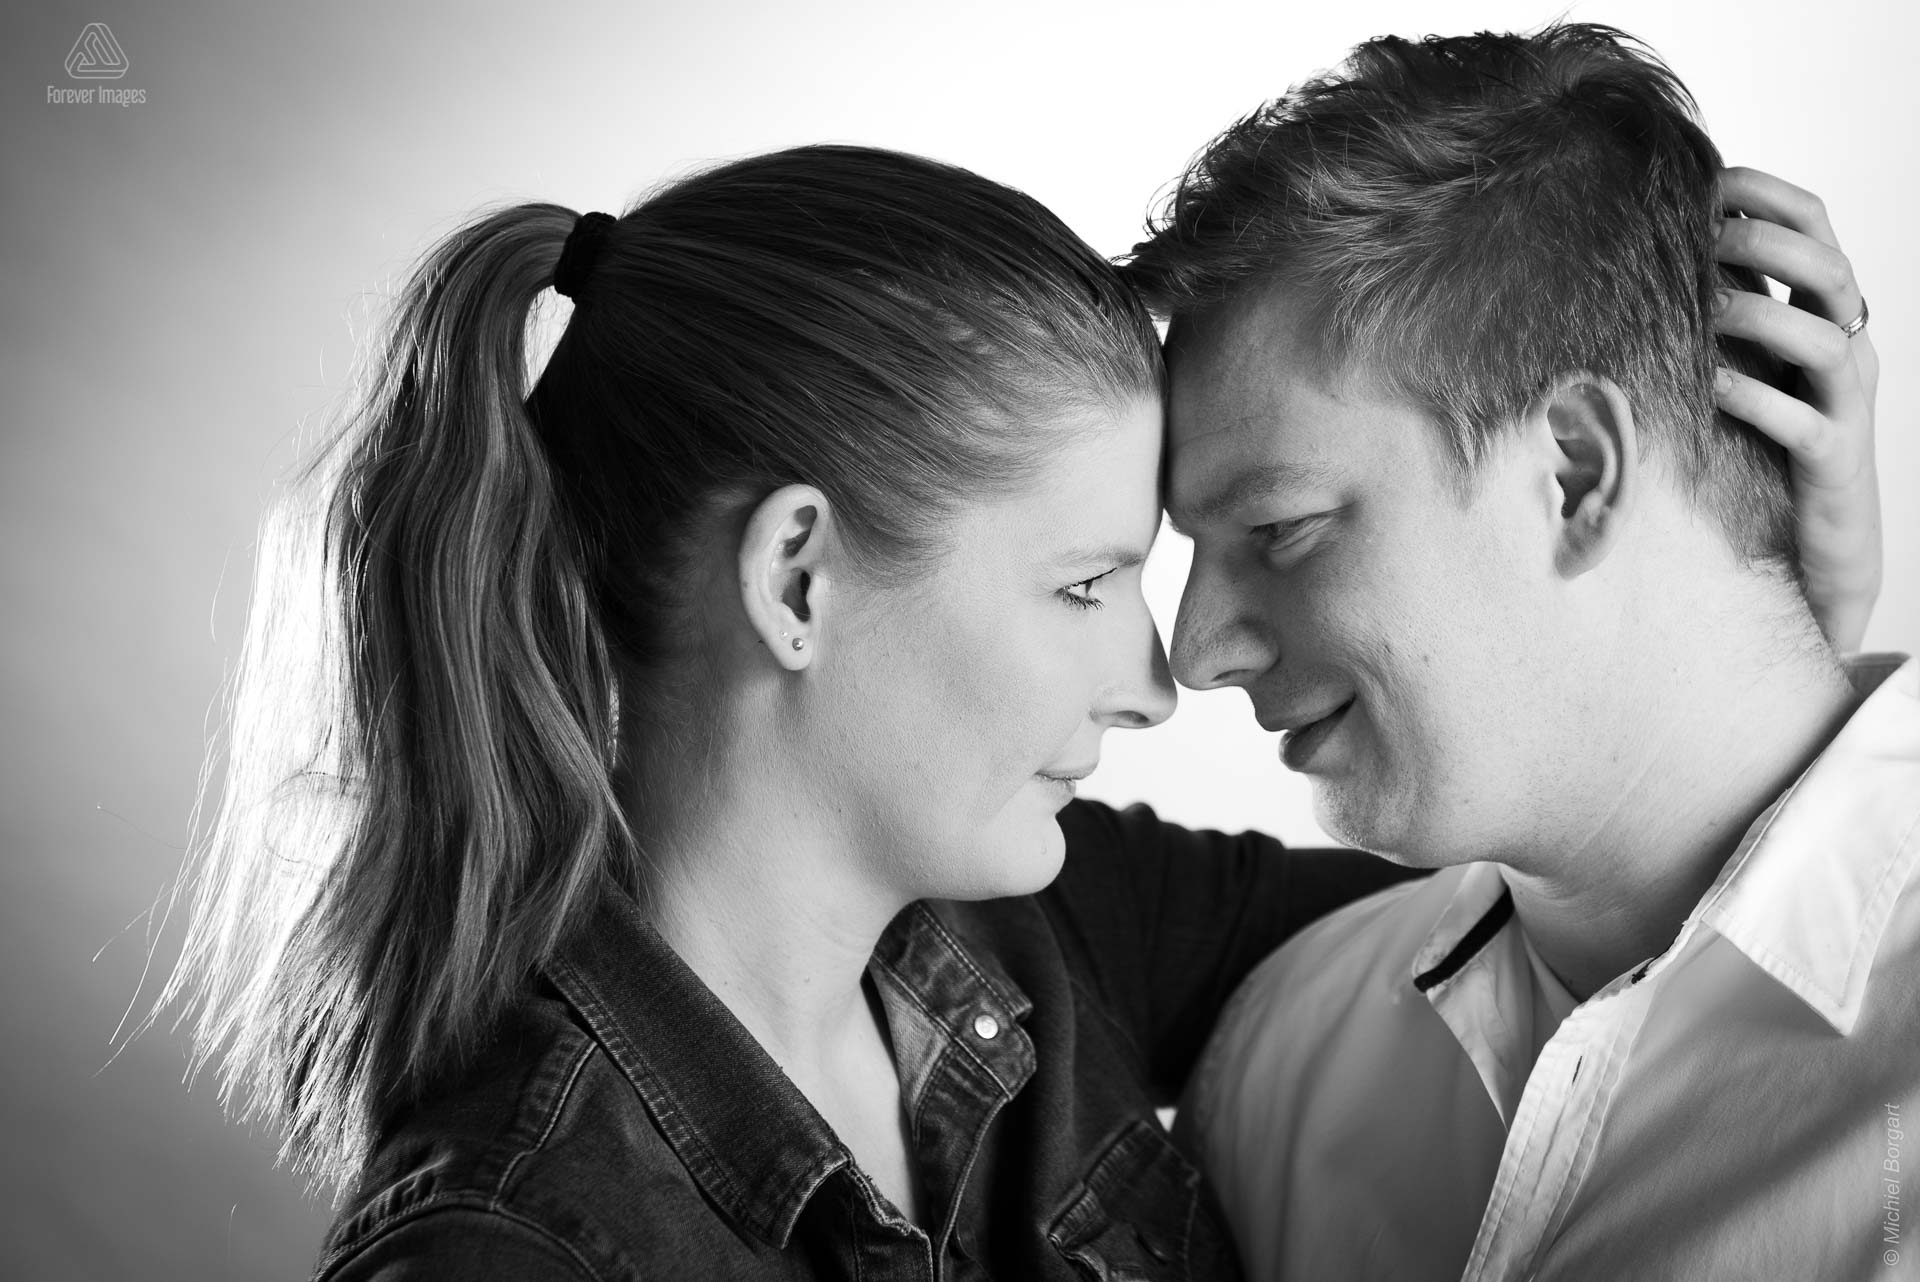 Portrait photo black and white B&W loveshoot in love | Aaron Emmy Willebrands | Portrait Photographer Michiel Borgart - Forever Images.